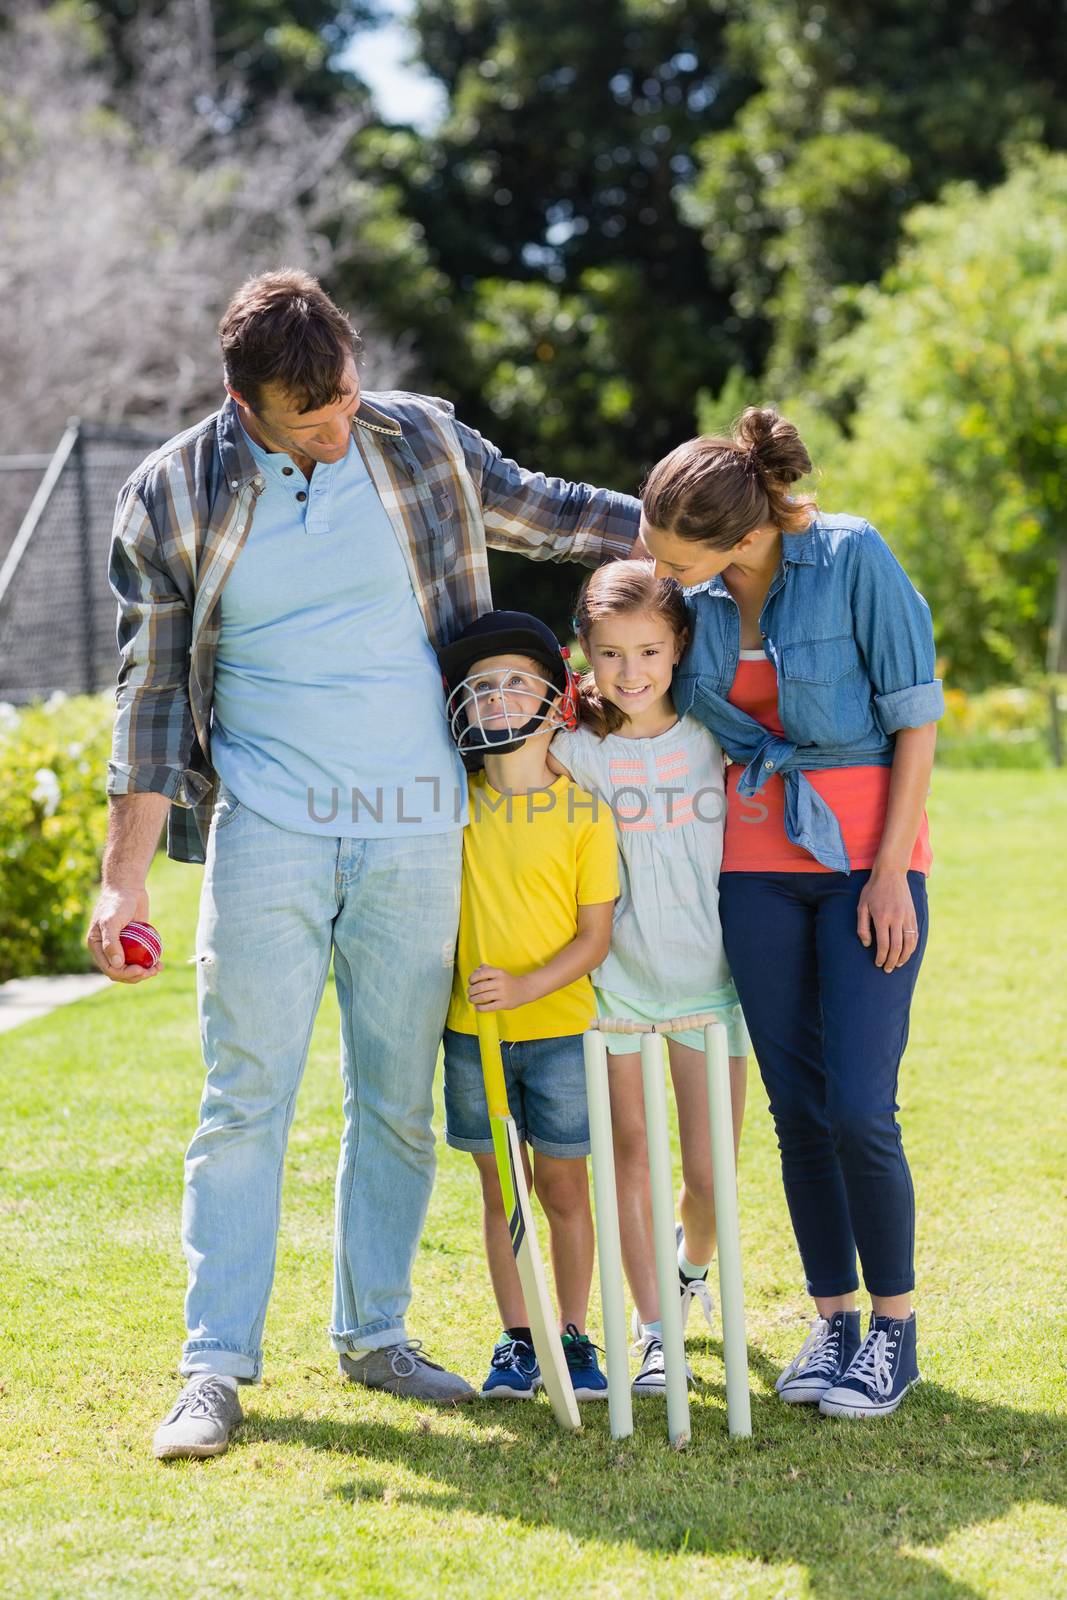 Happy family playing cricket together in backyard by Wavebreakmedia